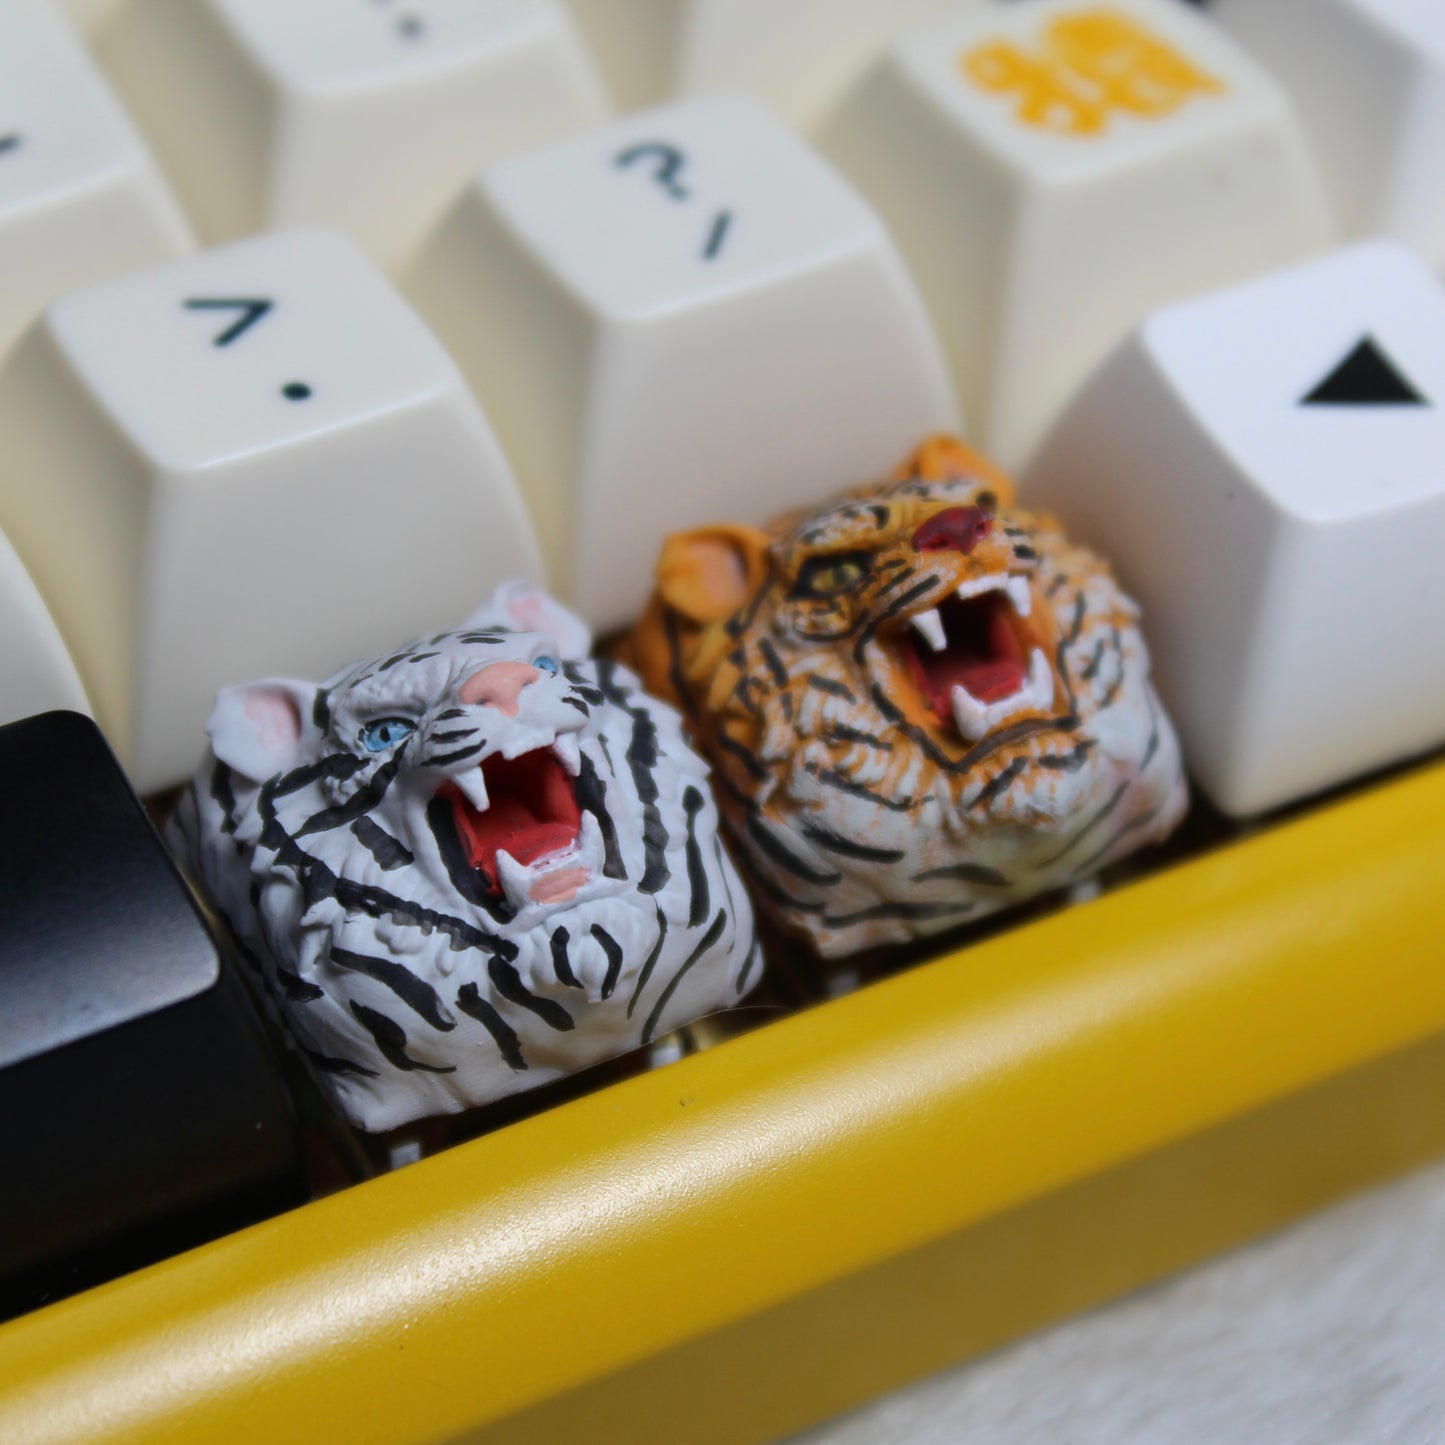 "Unleash the fierce allure of 'The Angry Tiger' with our Custom Artisan Keycap. Handcrafted with precision, this keycap features a captivating design inspired by the power and strength of a tiger. It's a bold statement piece that adds a touch of wild elegance to your keyboard. Elevate your setup with this unique and striking artisan keycap." 🐅🔥💻 #Keycaps #ArtisanKeycaps #TigerDesign